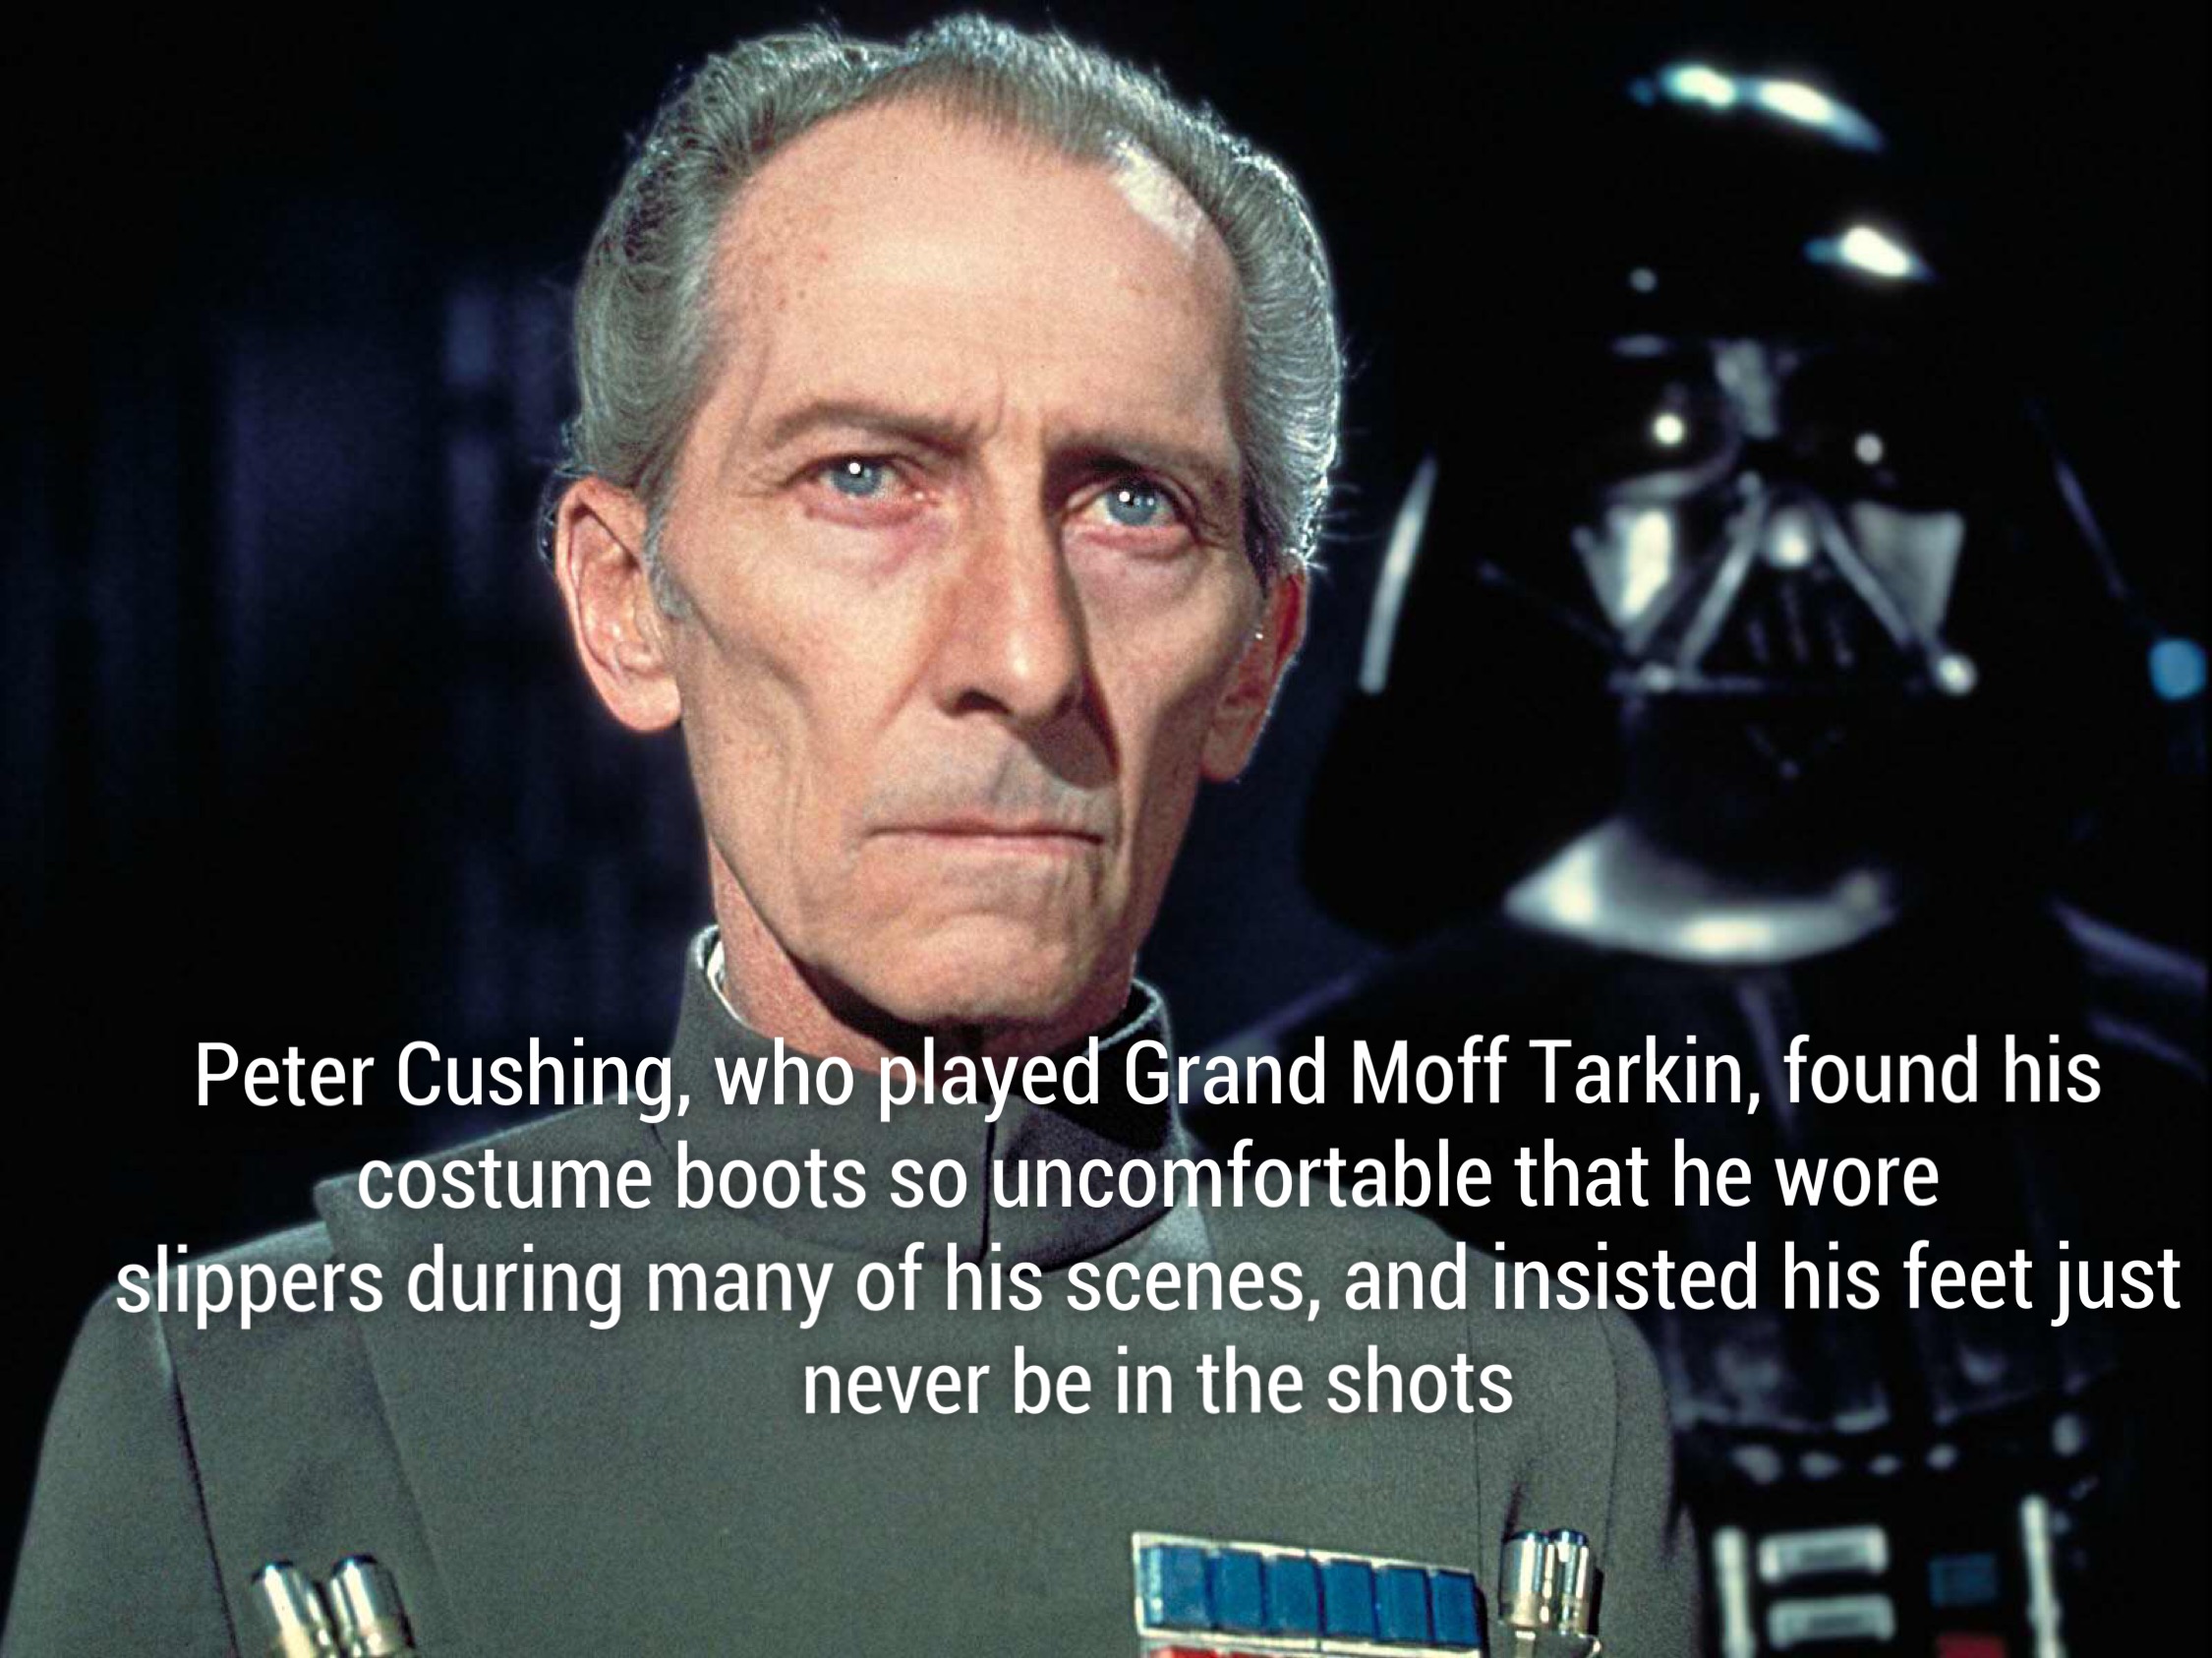 peter cushing - Peter Cushing, who played Grand Moff Tarkin, found his costume boots so uncomfortable that he wore slippers during many of his scenes, and insisted his feet just never be in the shots